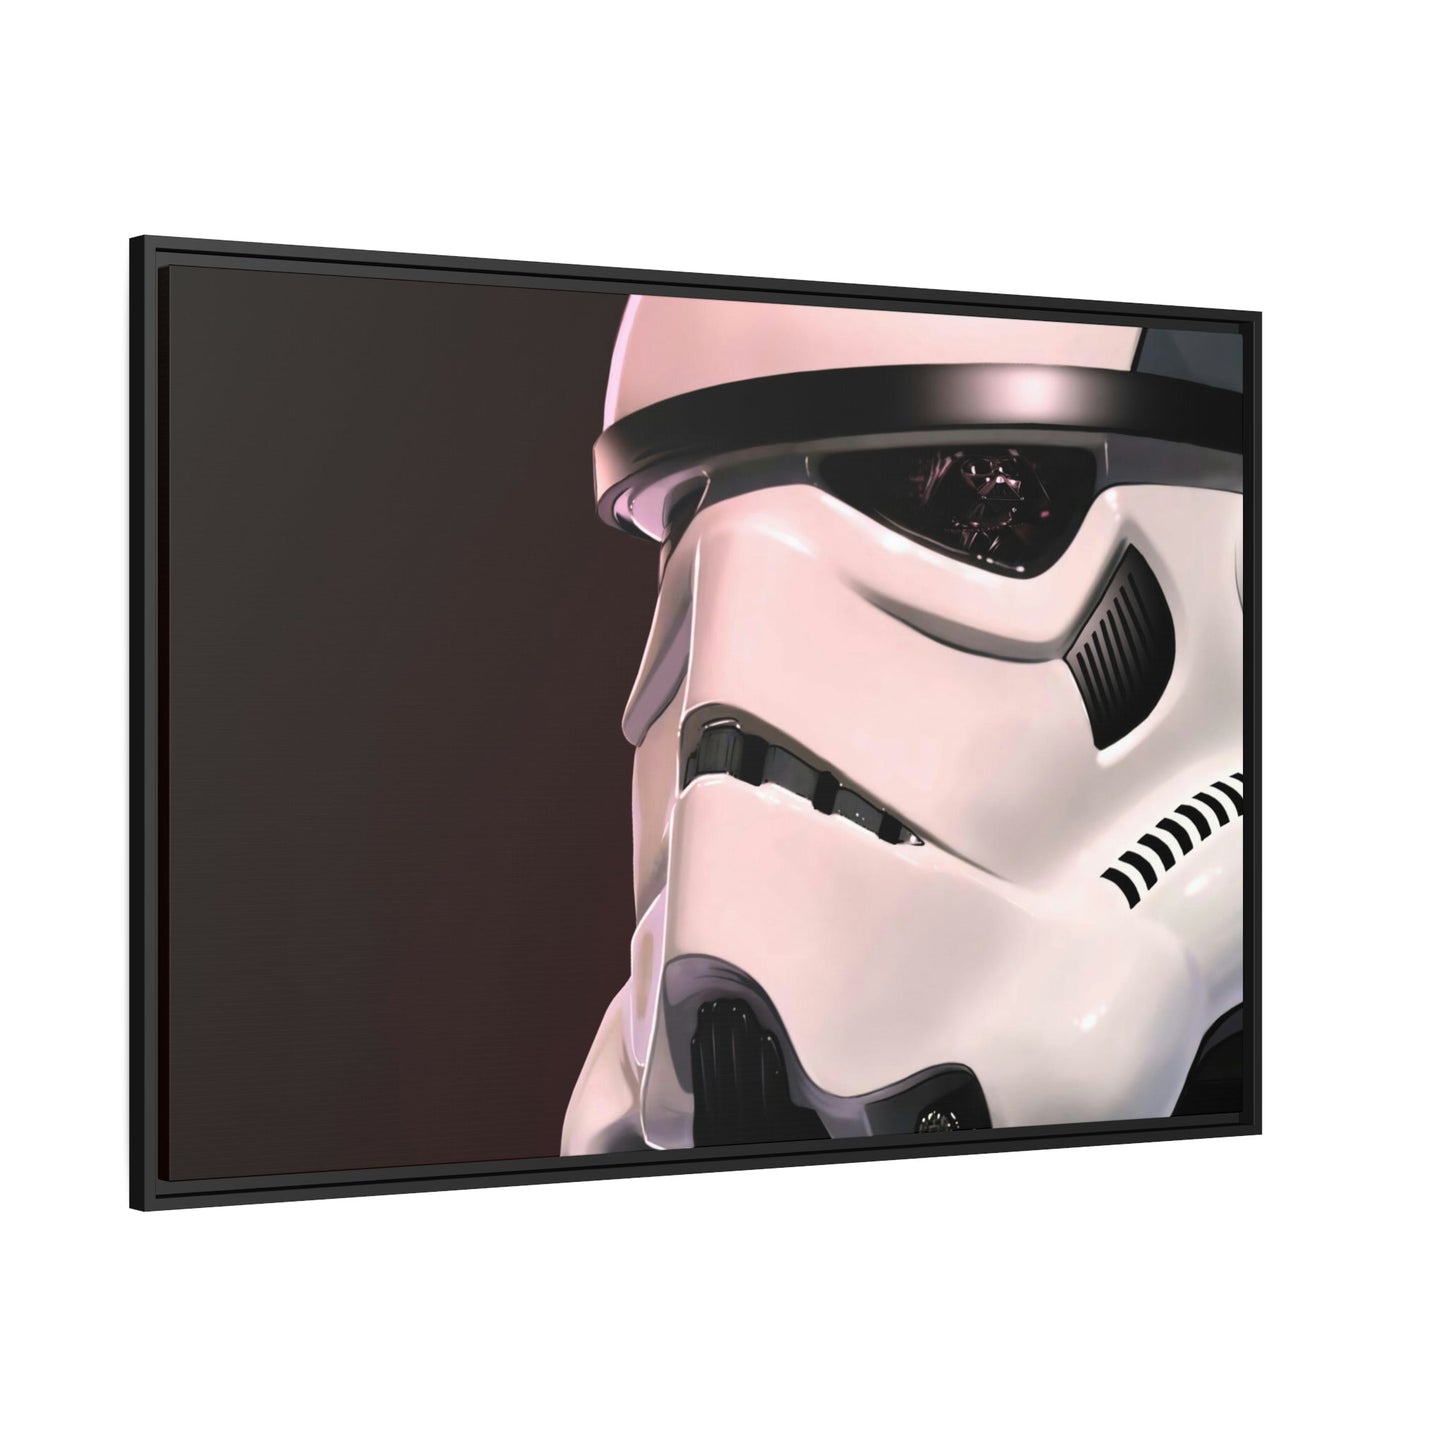 R2-W0: The White Droid's Journey in Star Wars - Framed Canvas & Poster Art